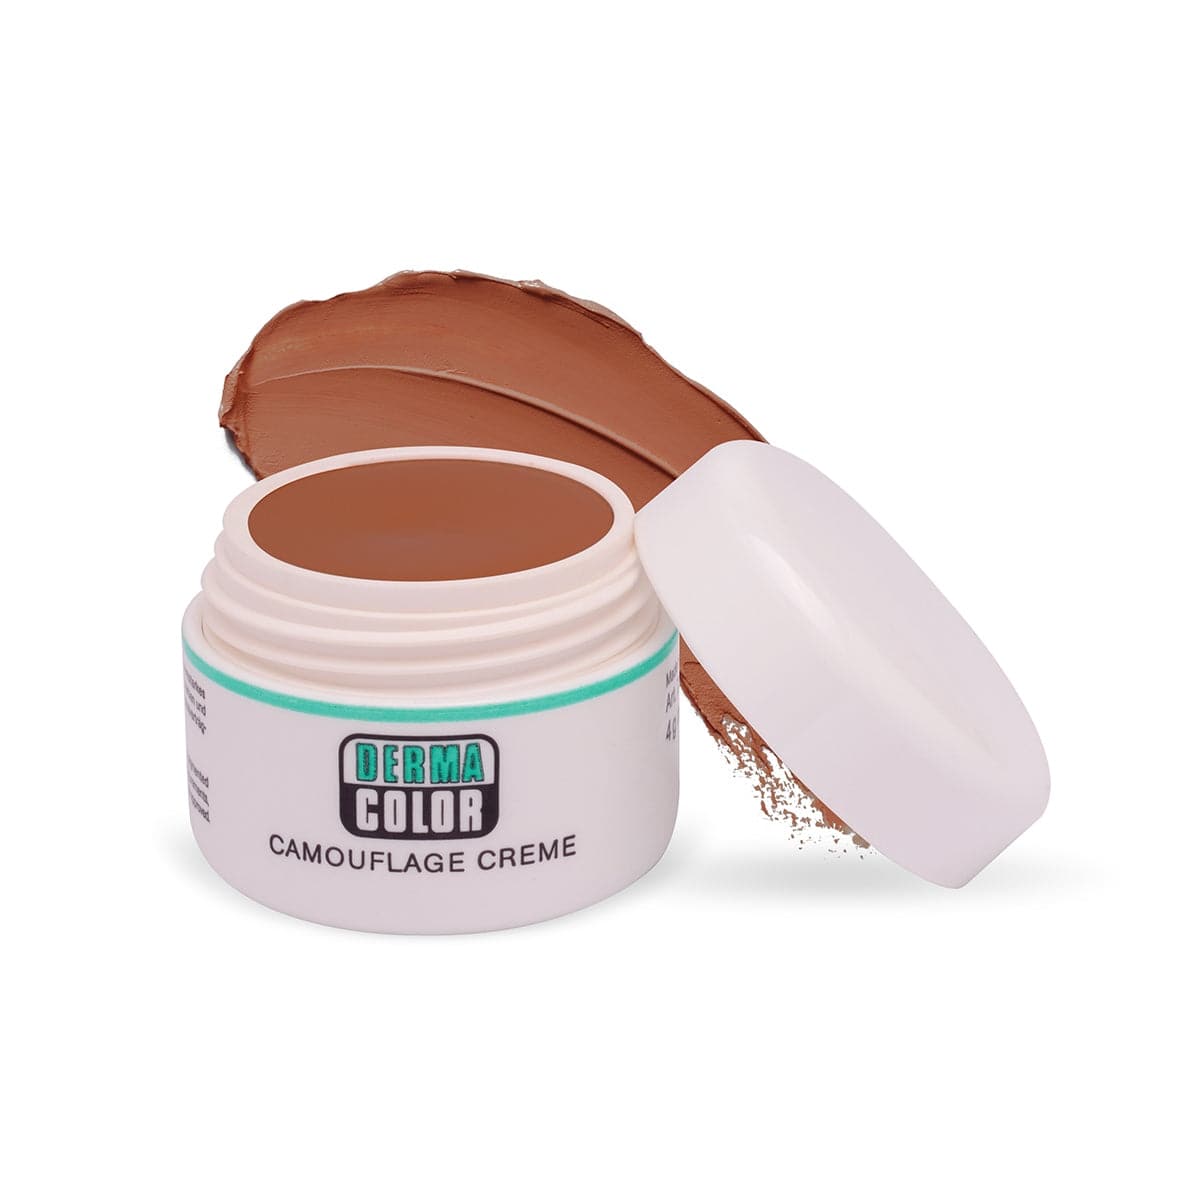 Kryolan Derma Color Camouflage Creme Refill - D32 4 gm - Premium Health & Beauty from Kryolan - Just Rs 7580.00! Shop now at Cozmetica